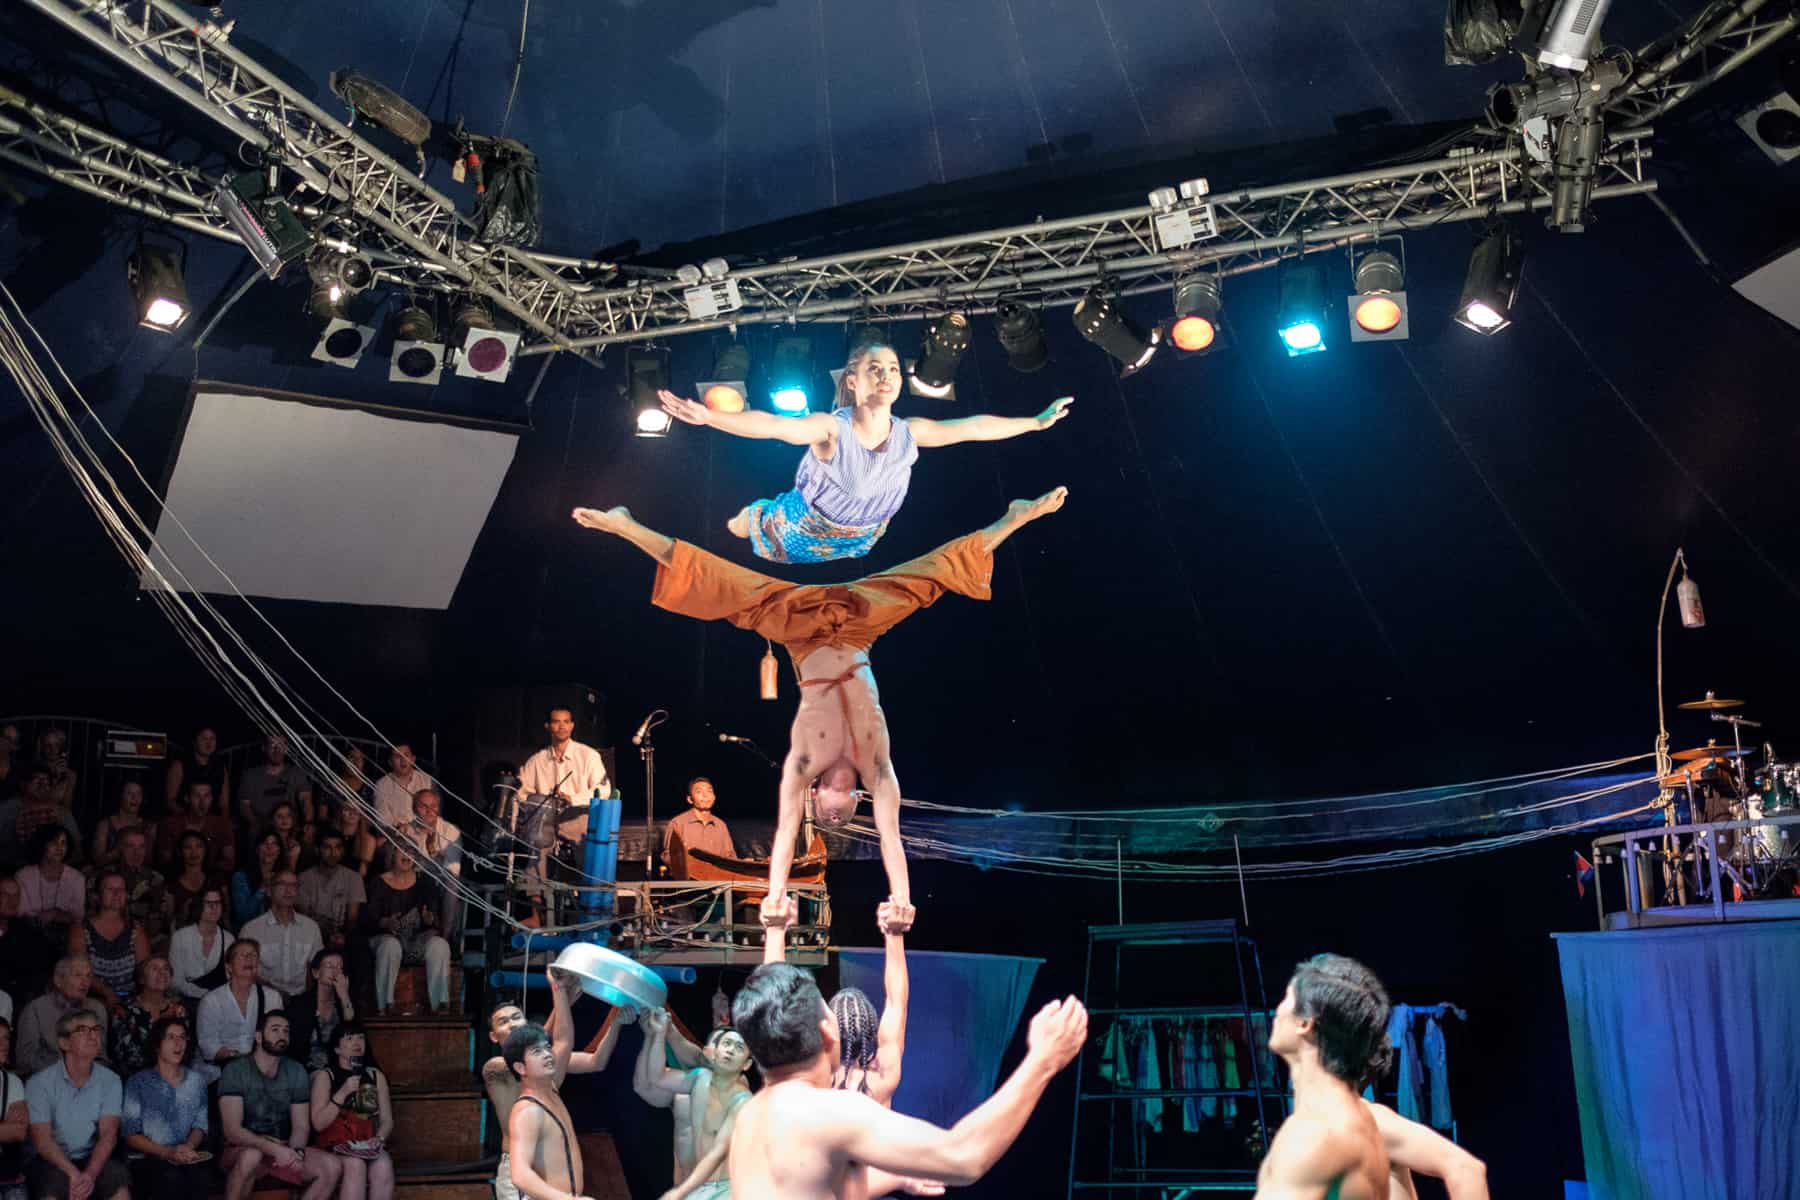 A woman in blue flies over an upside down man doing the splits mid air, held up by a series of performers on the ground. In the background an audience looks on inside the dark circus tent. 